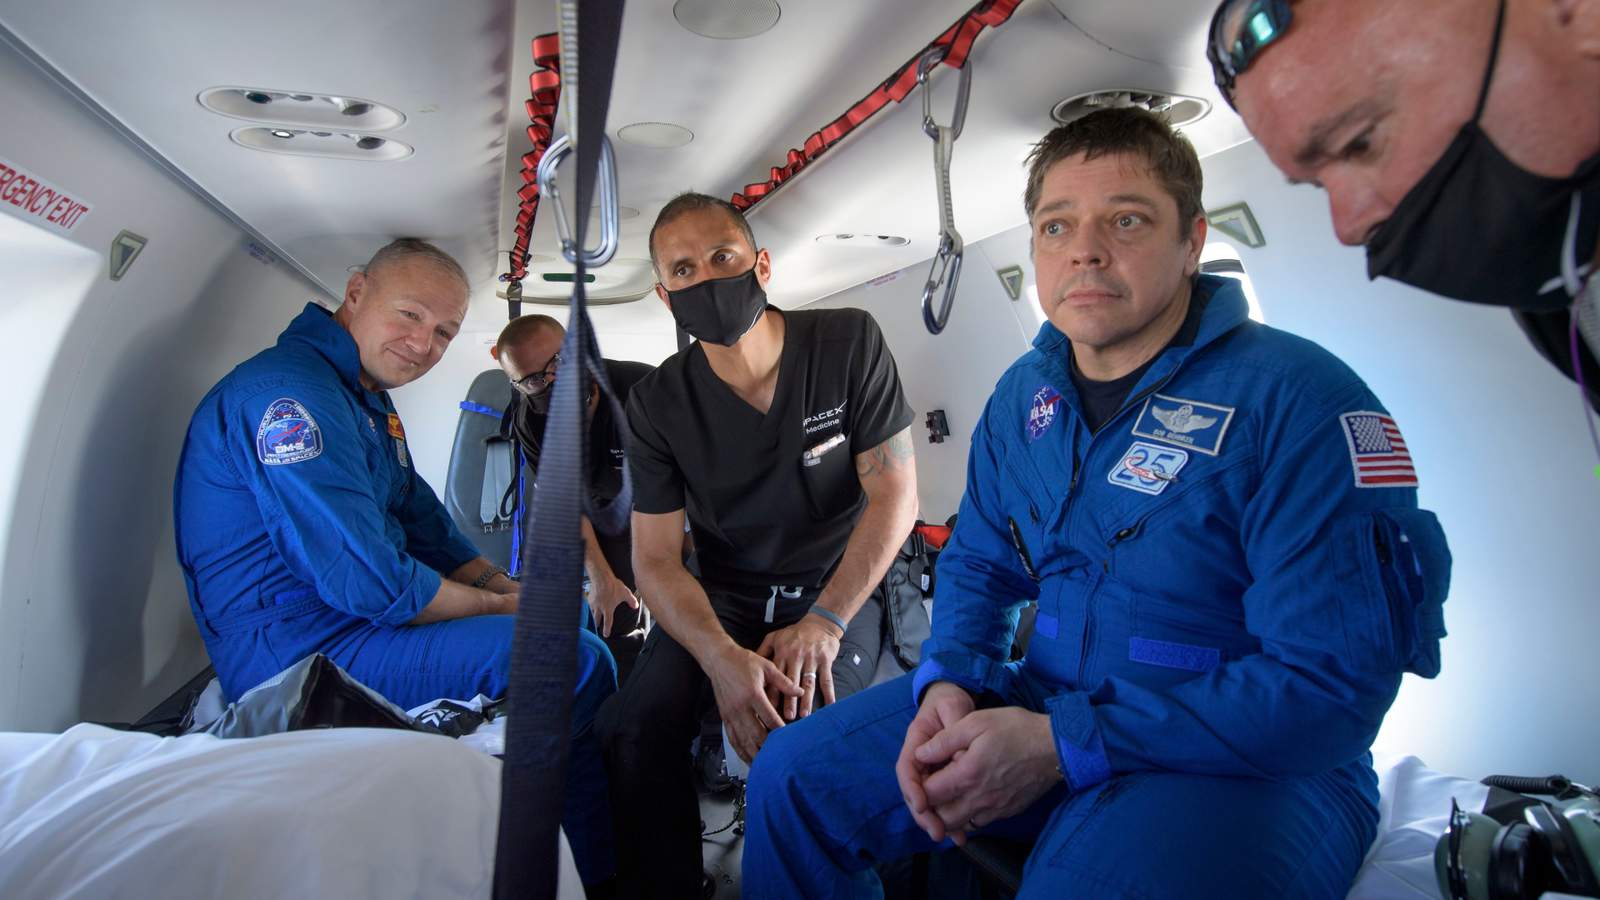 ‘It came alive:’ NASA astronauts explain dealing with splashdown in SpaceX Dragon